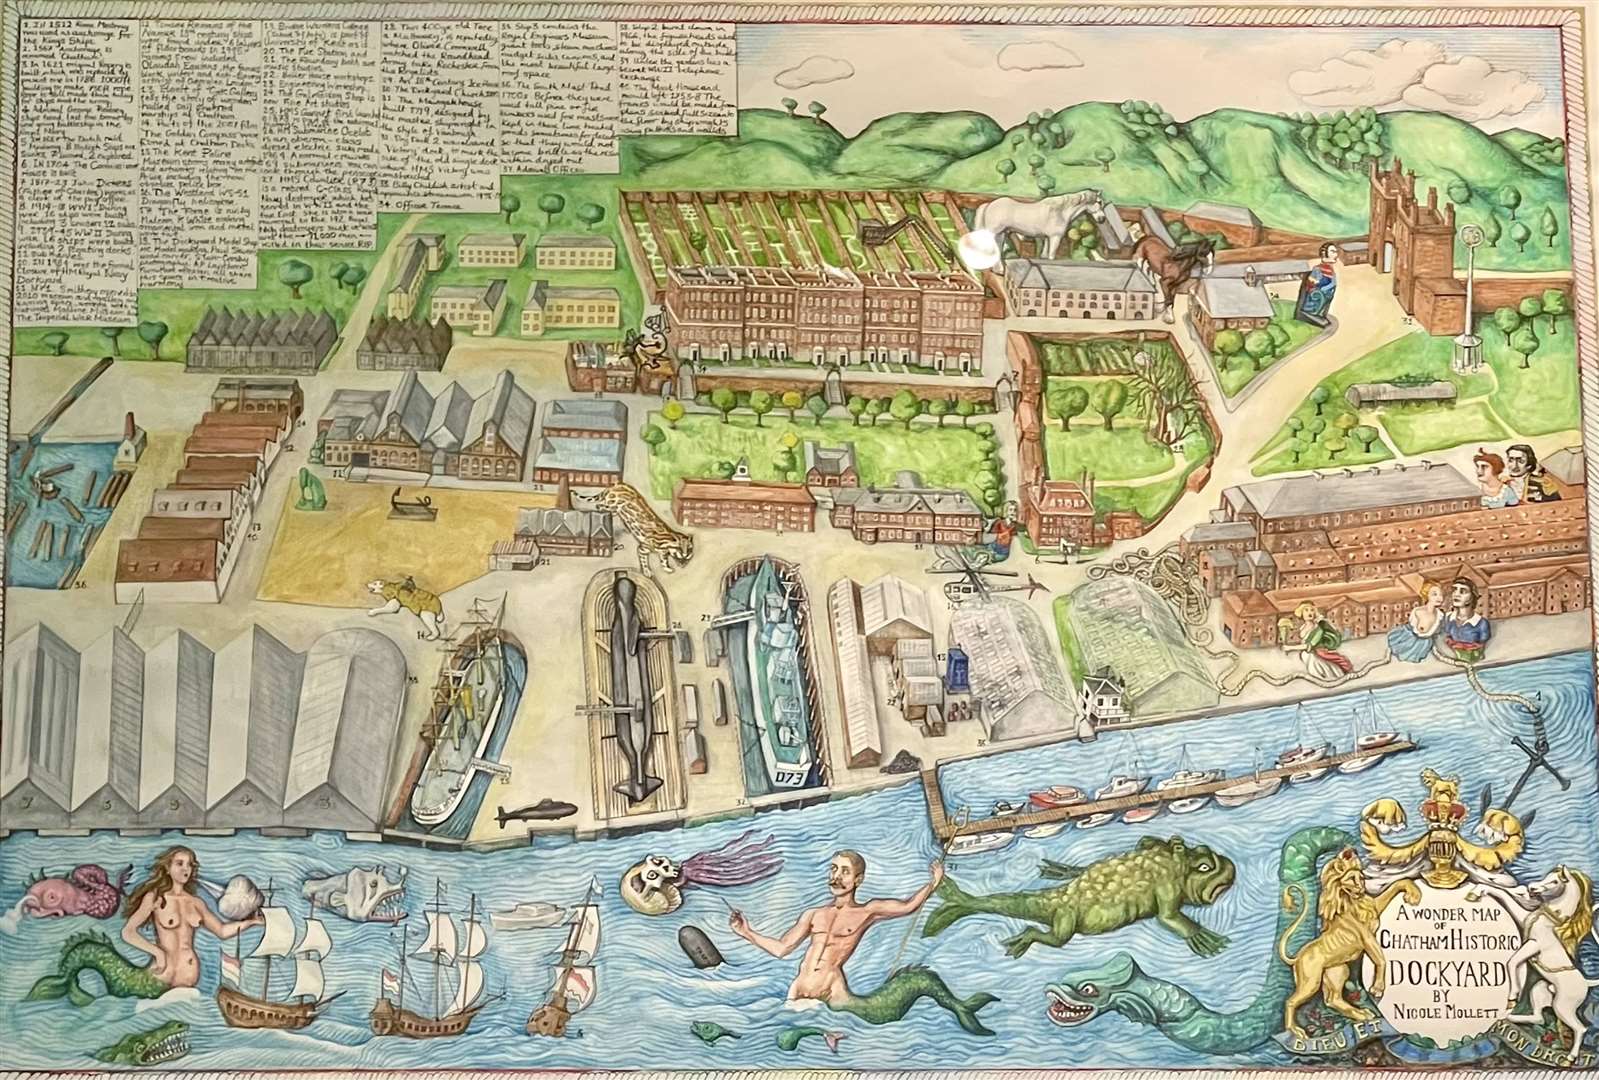 Kent-based artist Nicole Mollett's whimsical Wonder Map of the Chatham Dockyard, featuring mermaids and sea serpents. Picture: Nicole Mollett